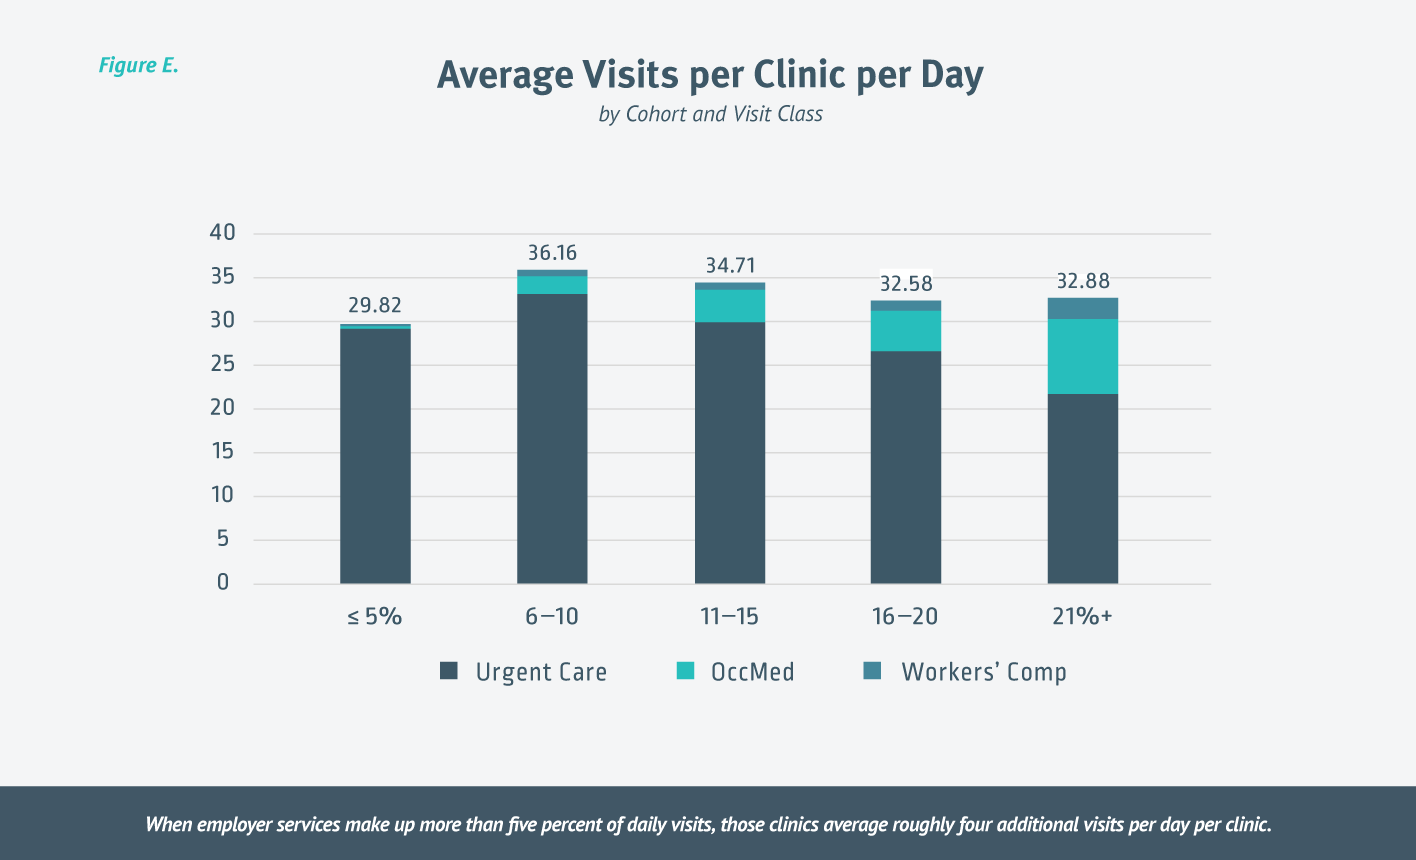 Chart showing Average Urgent Care Visits Per Clinic Per Day by Cohort and Visit Class